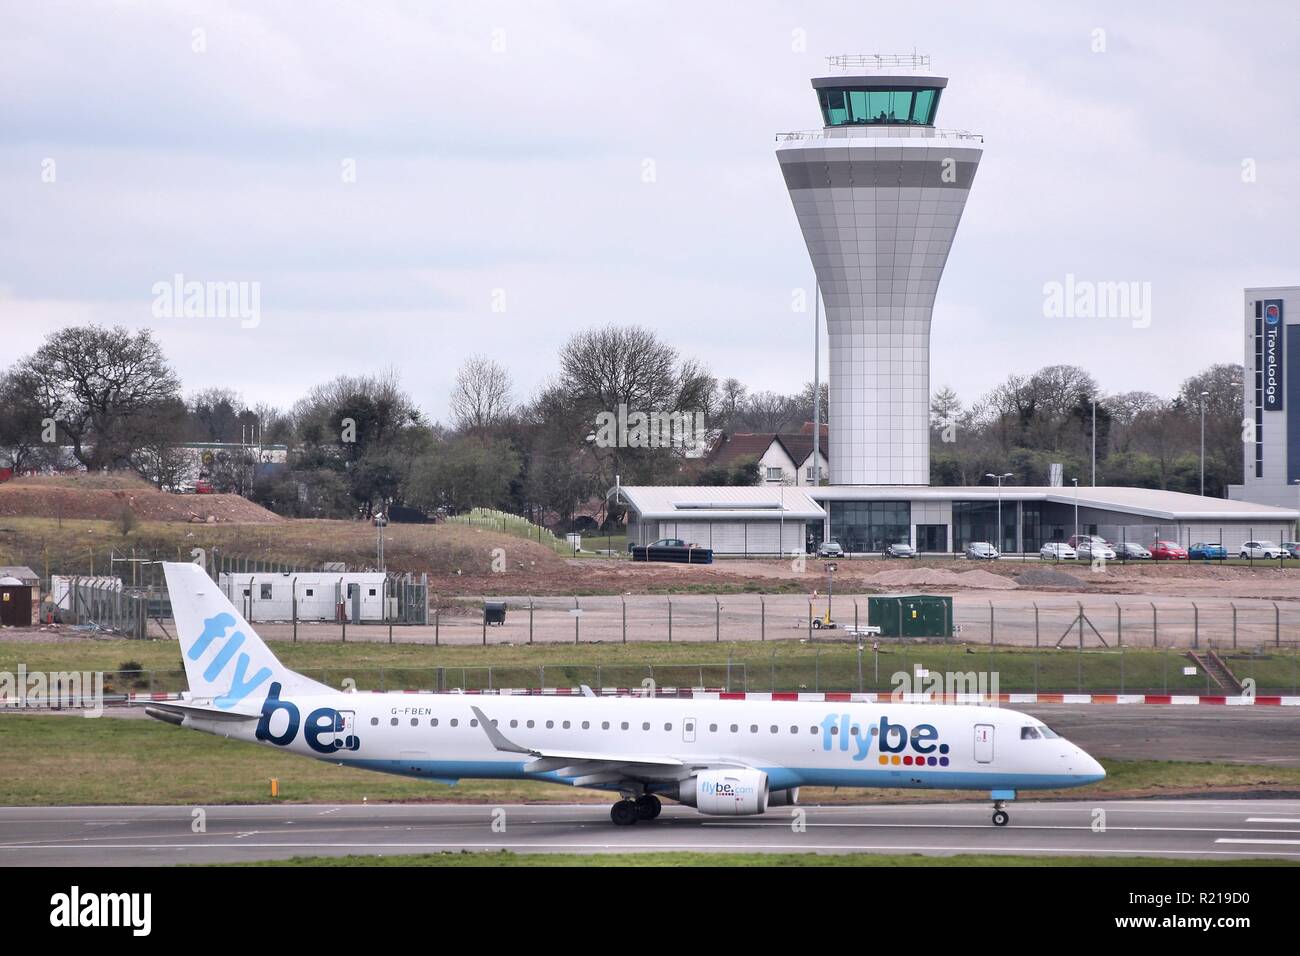 BIRMINGHAM, UK - APRIL 24, 2013: Pilots taxi Flybe Embraer E-195 at Birmingham Airport, UK. Flybe carried 7.6 million passengers in 2013. Stock Photo